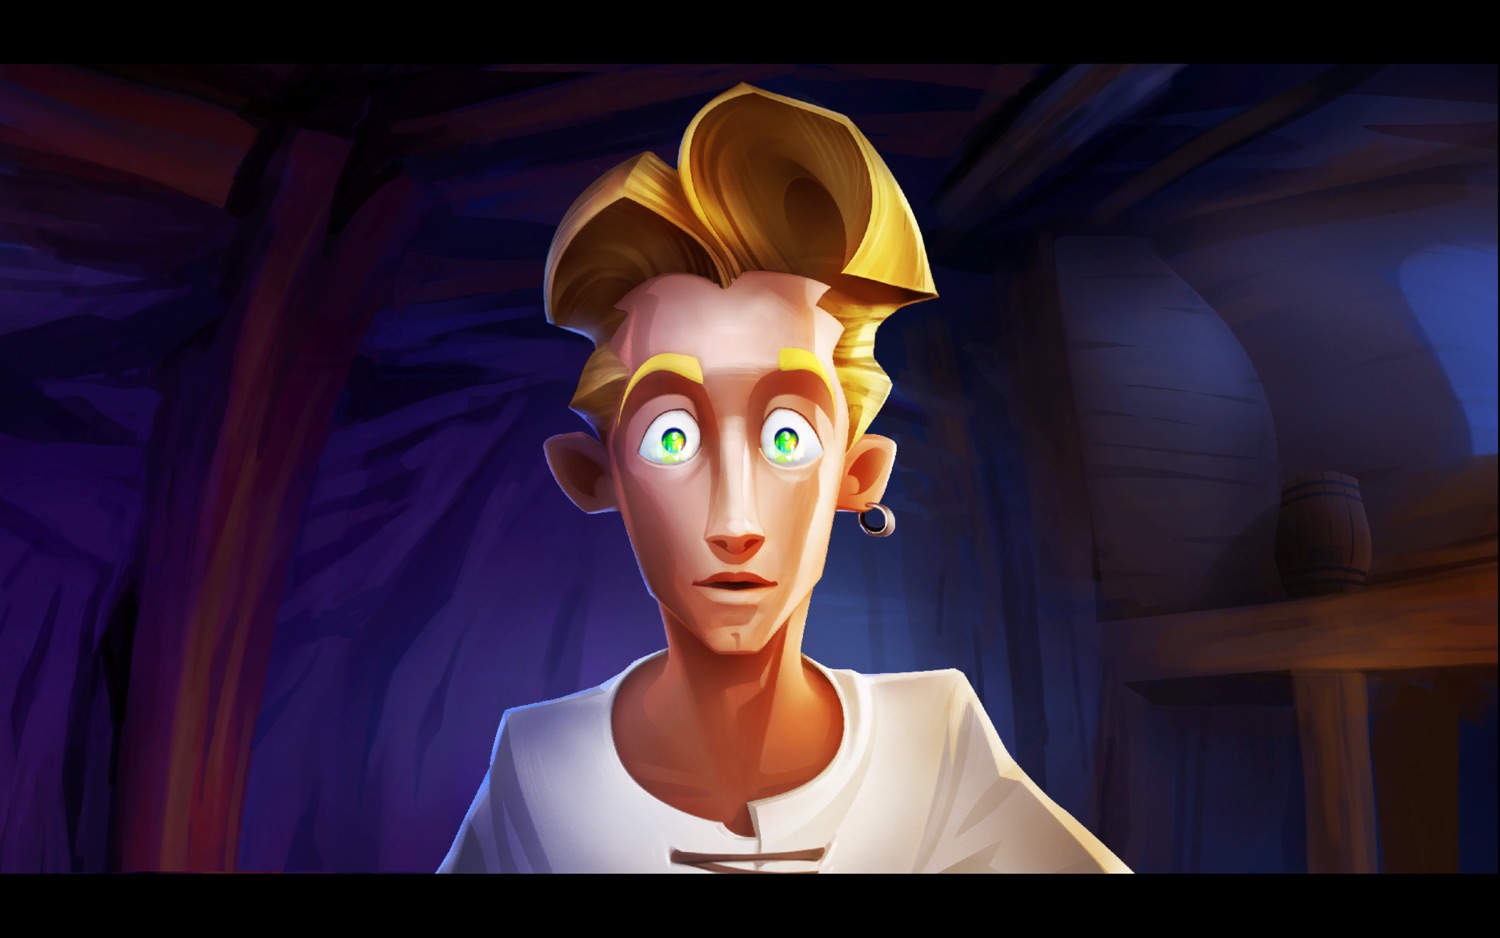 A screenshot of the Secret of Monkey Island showing a close up of Guybrush being awed by a monster (which turns out to be a parrot)